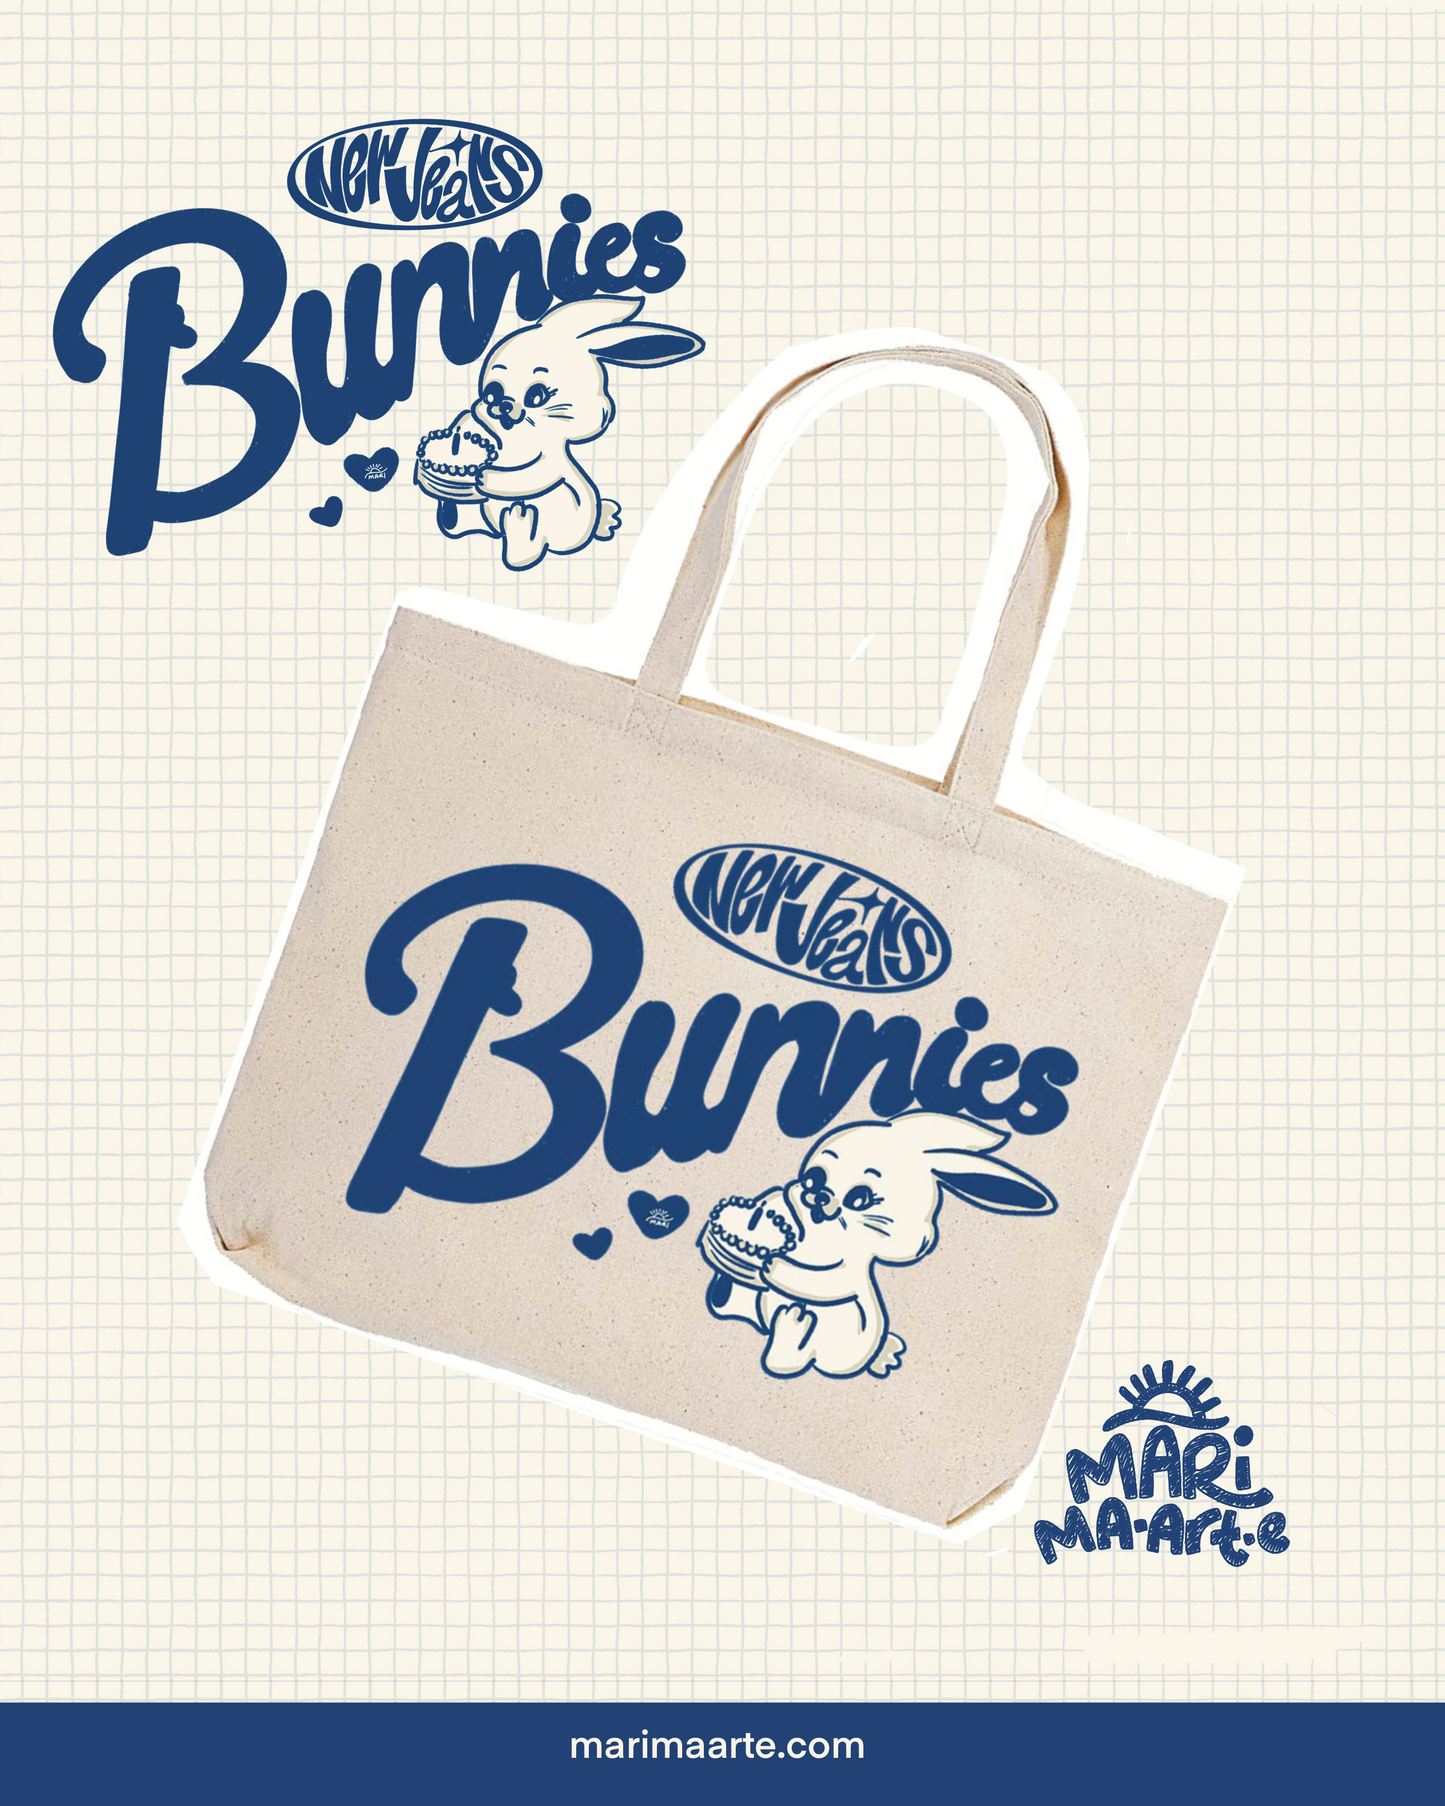 NEW JEANS BUNNIES LARGE TOTE